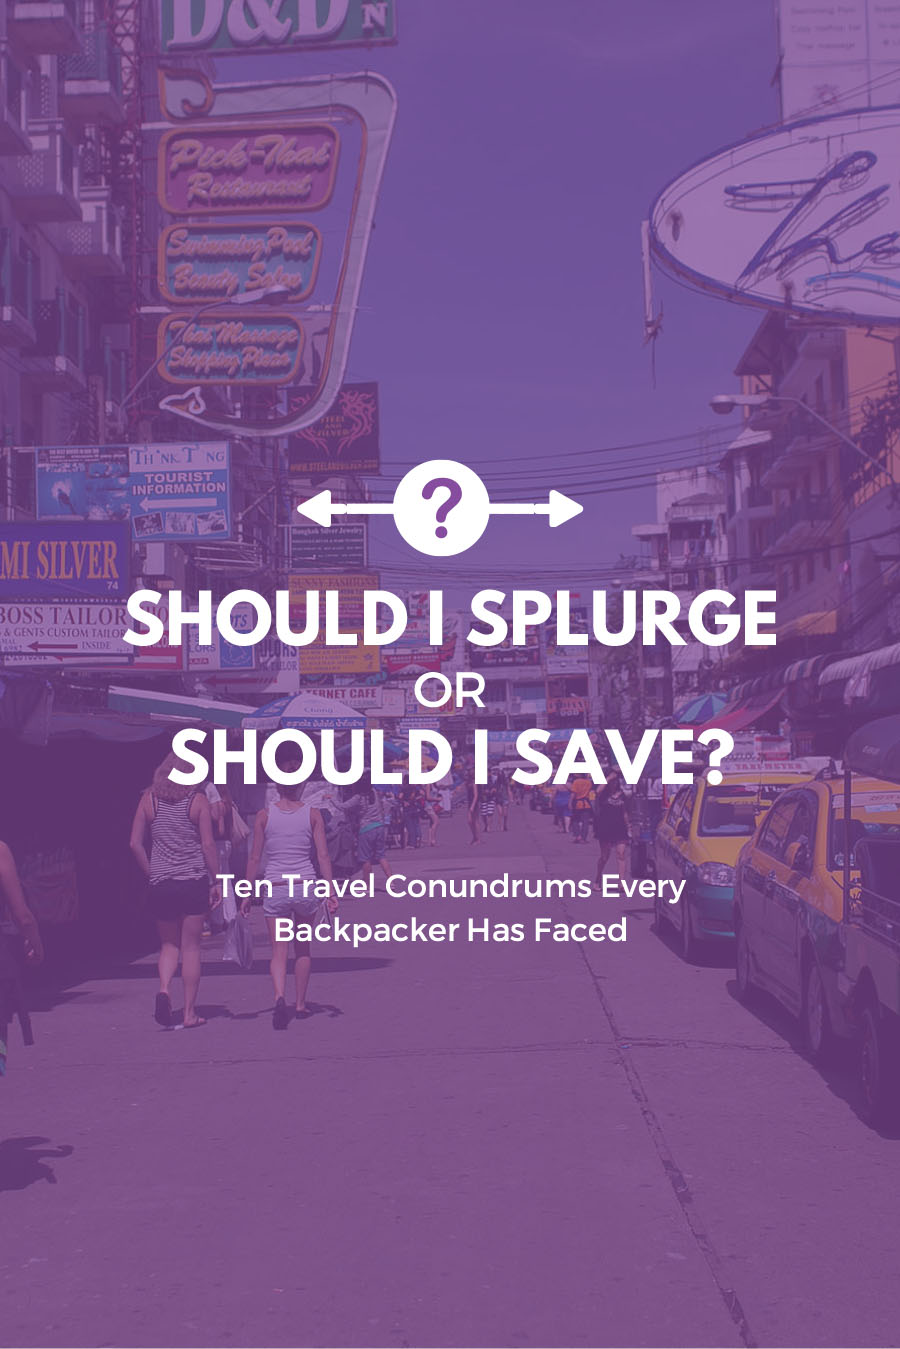 Should I splurge or save? | Ten Travel Conundrums Every Backpacker Has Faced